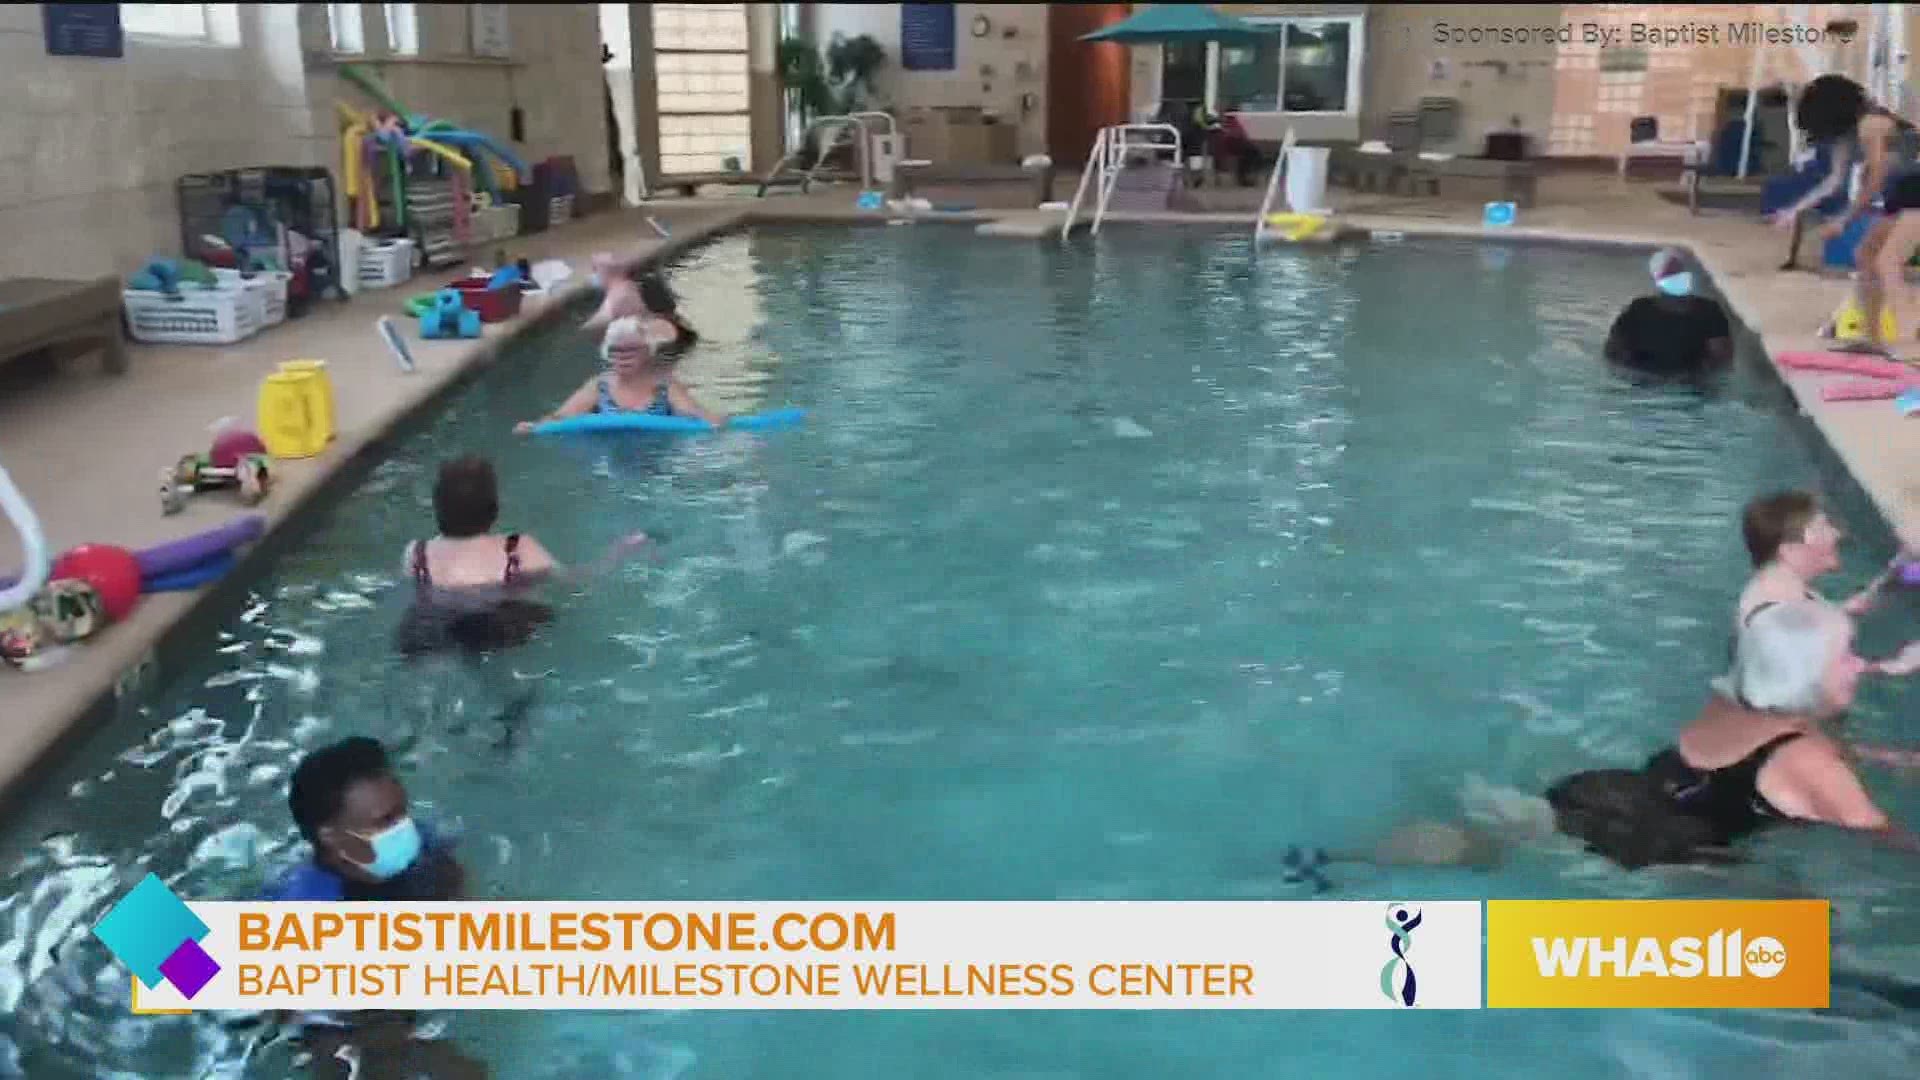 Baptist Health/Milestone Wellness Center is located at 750 Cypress Station Dr in Louisville, KY. To learn more, go to BaptistMilestone.com or call 502-896-3900.